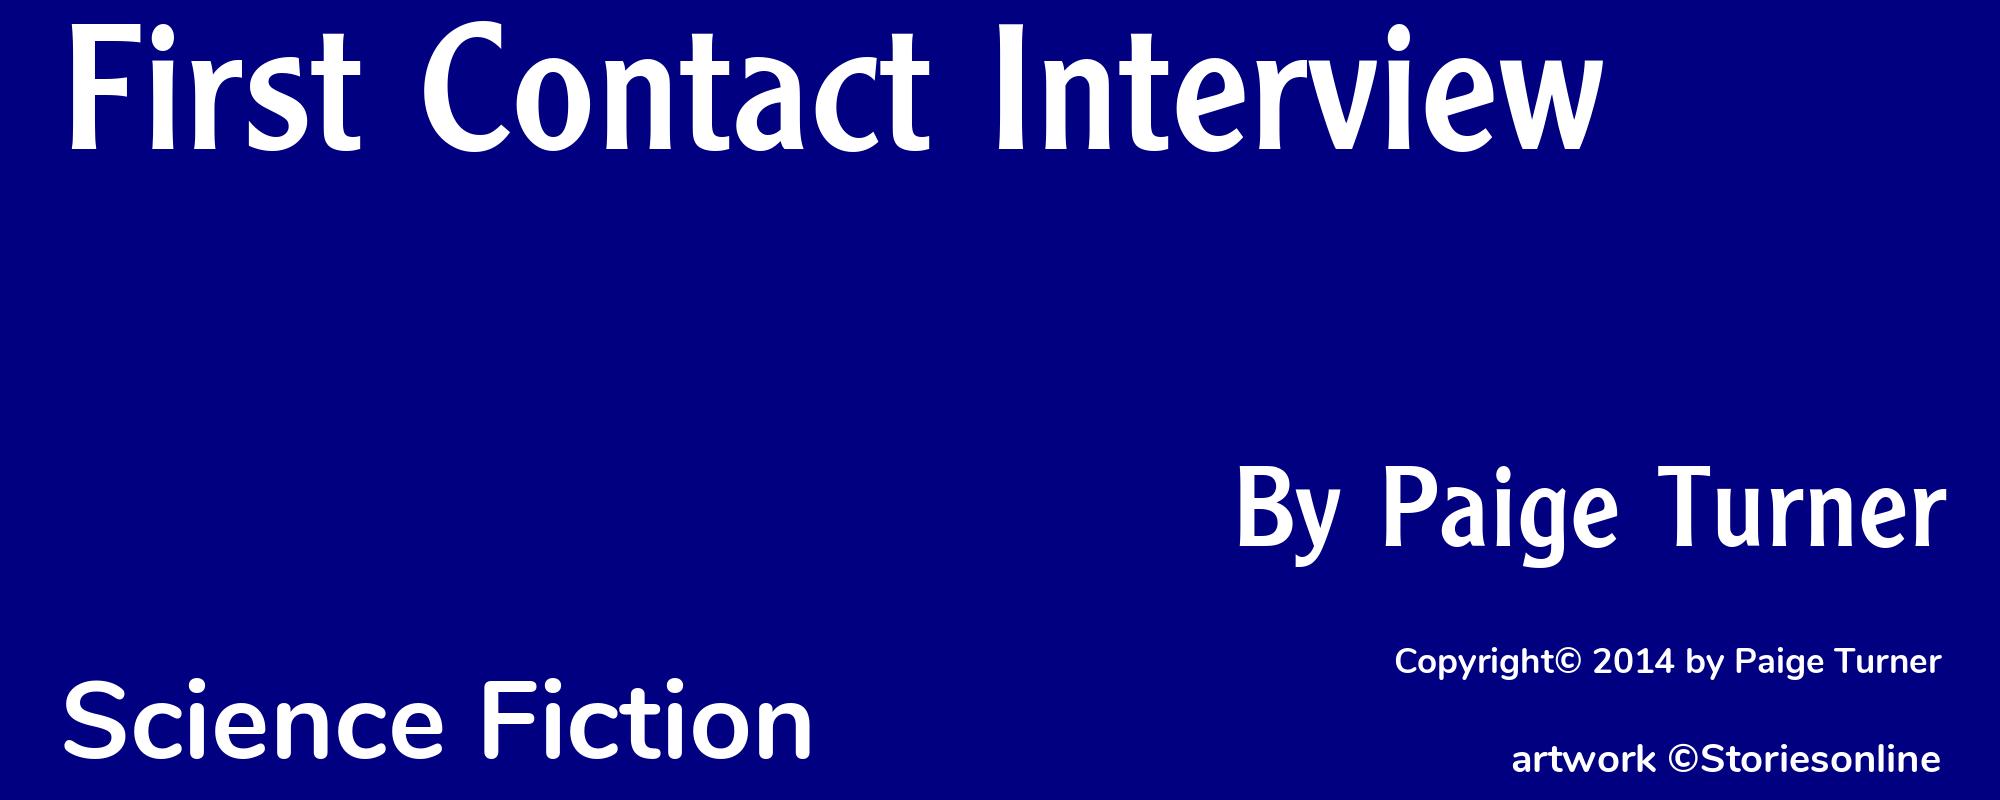 First Contact Interview - Cover